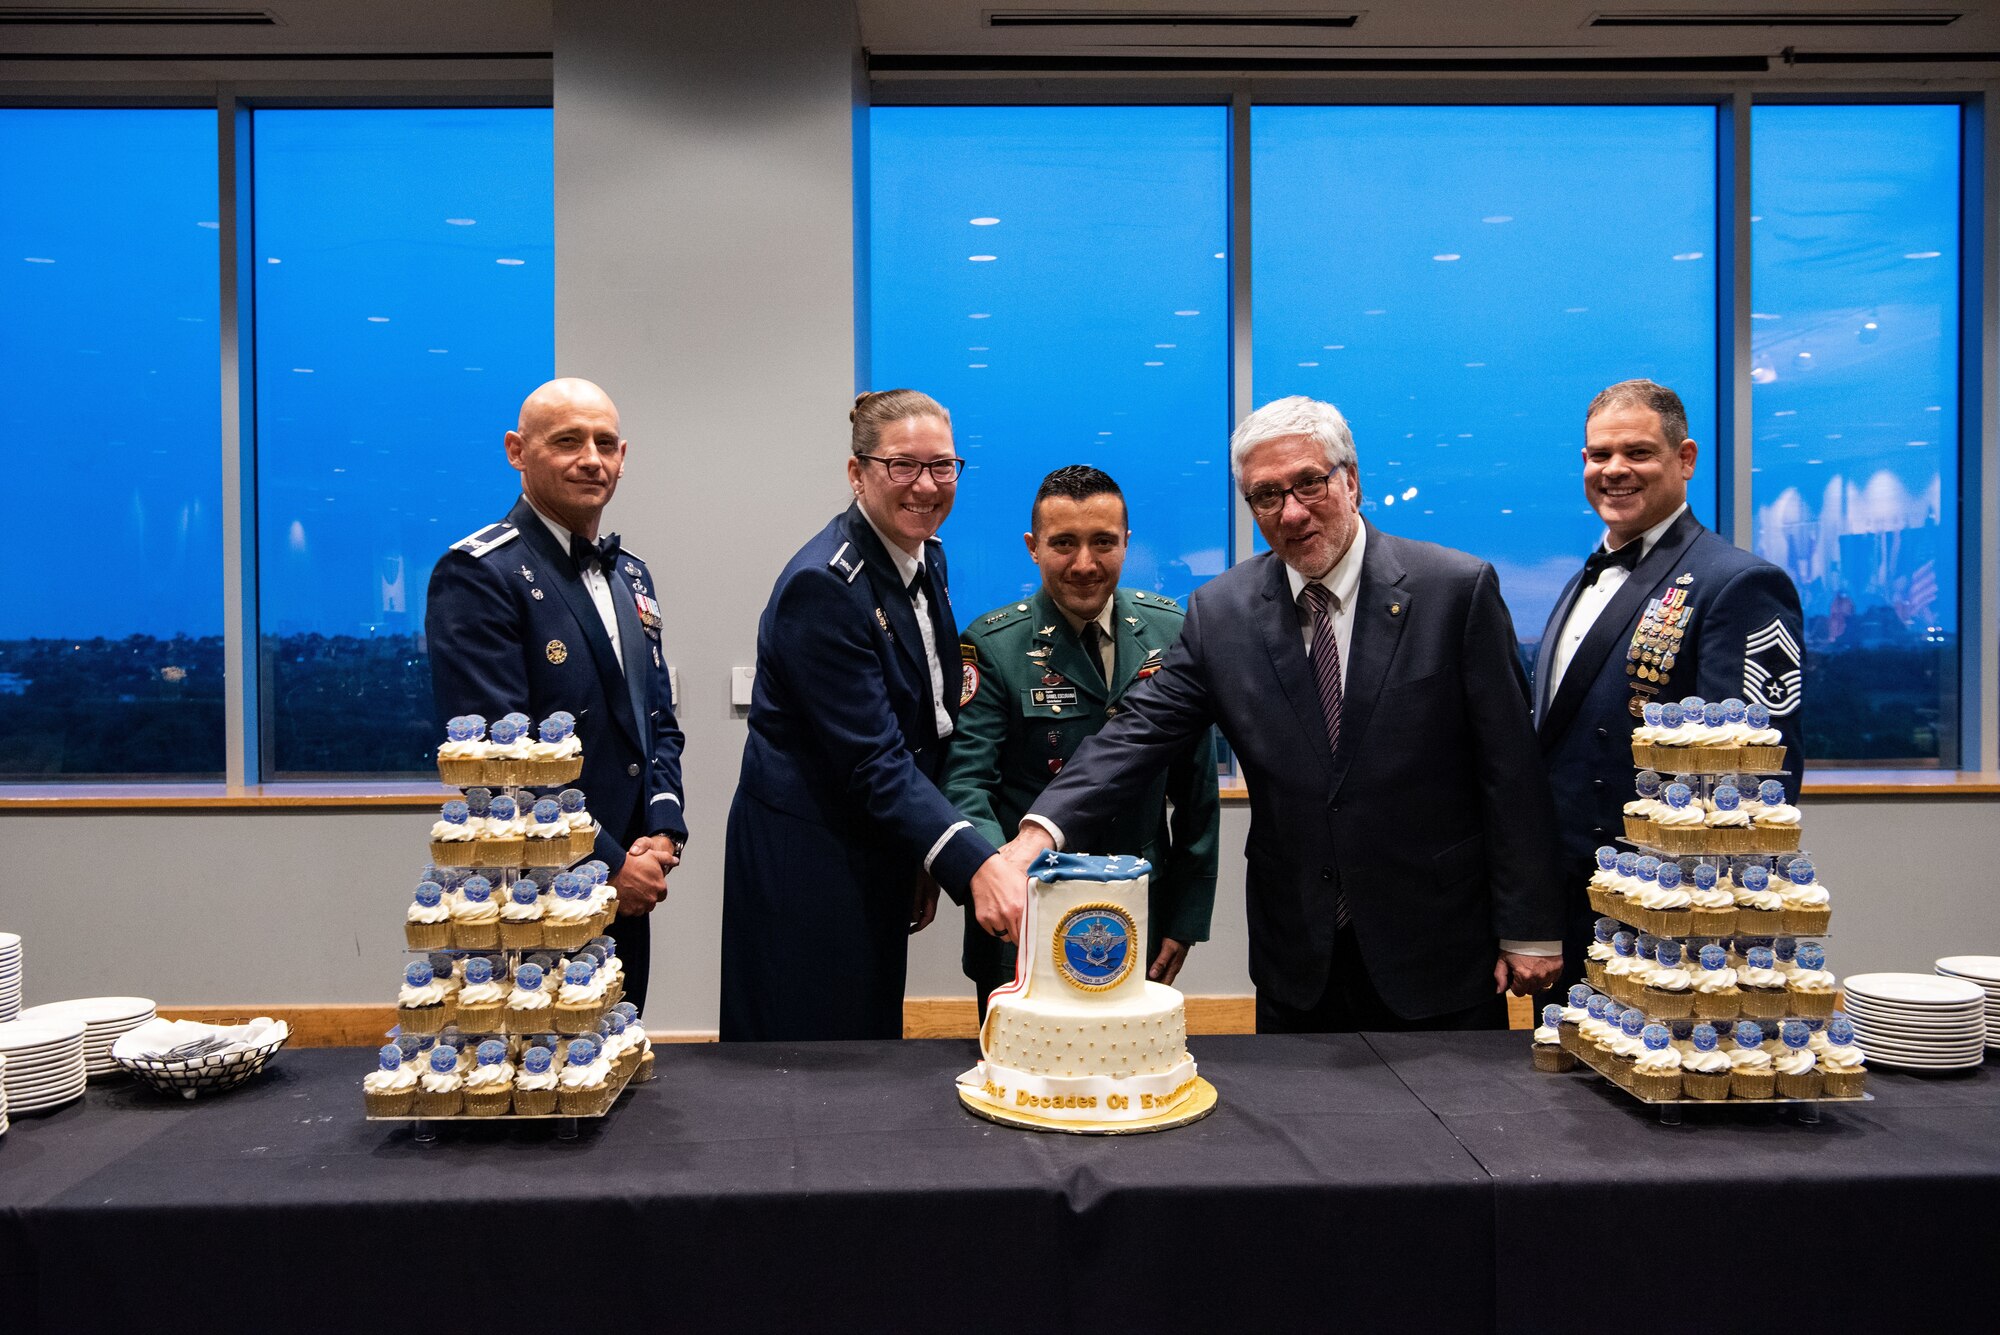 Col. Lauren Courchaine, 37th Training Wing Commander, Ambassador Luis Moreno and Capitan Jhonatan D. Escuraina Novoa of the Colombian Army are flanked by Col. José Jiménez, Jr., and Chief Master Sgt. Yusef Saad, IAAFA Senior Enlisted Leader, as they prepare to cut into the ceremonial cake. As recipient of the General Fernando Melgar Award, an outstanding student recognition, Novoa helped the leaders with the ceremonial cake cutting. More than 60 international military students from seven partner nations and the USAF graduated during the first training cycle of 2023. IAAFA provides instruction in professional military education and leadership, aircrew training and technical courses – all in Spanish.  (U.S. Air Force photo by Vanessa R. Adame)